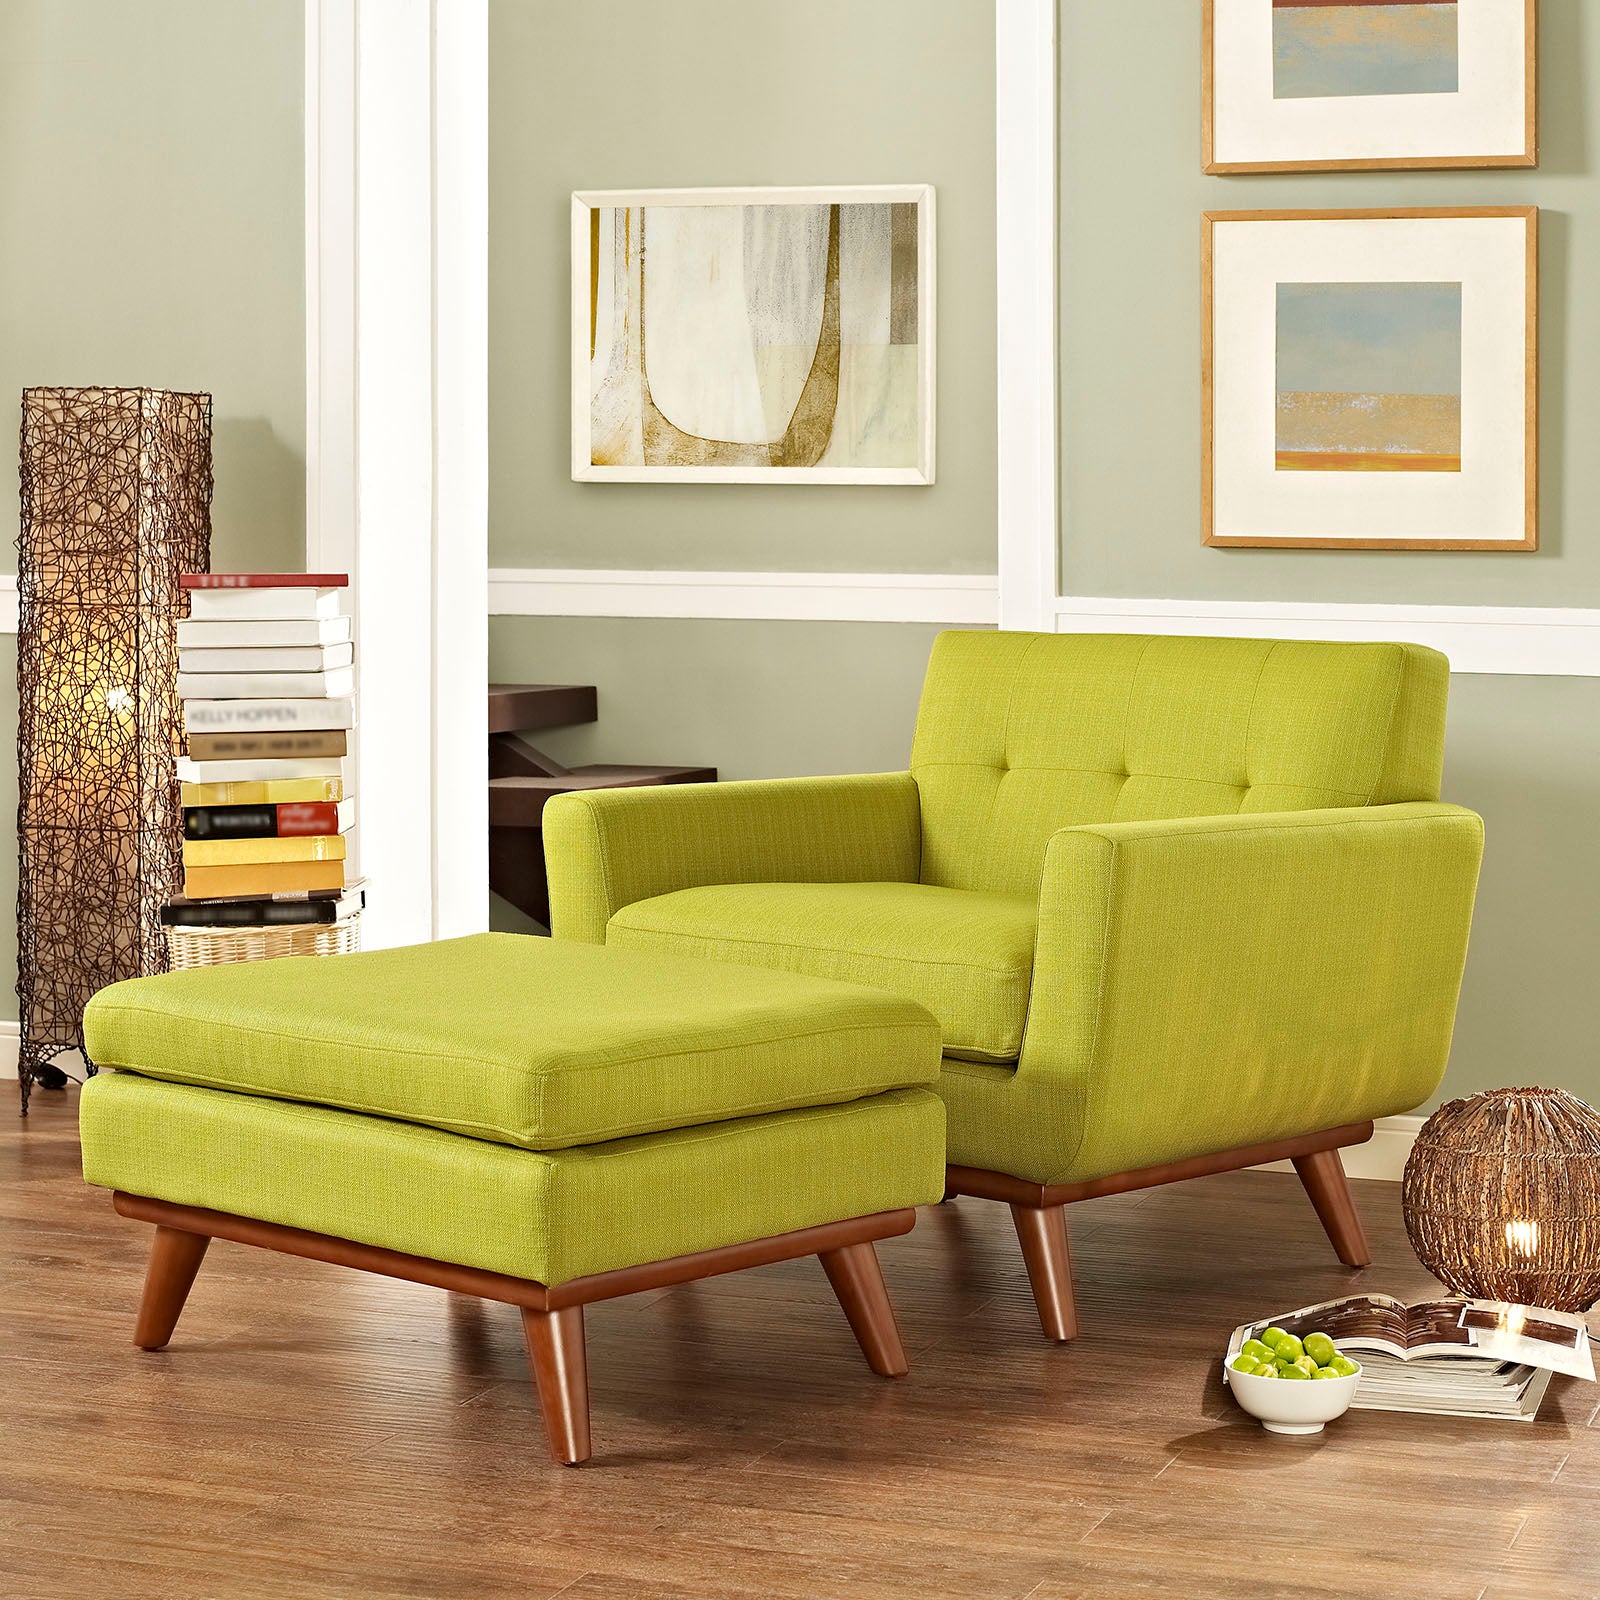 Engage 2 Piece Armchair and Ottoman - East Shore Modern Home Furnishings